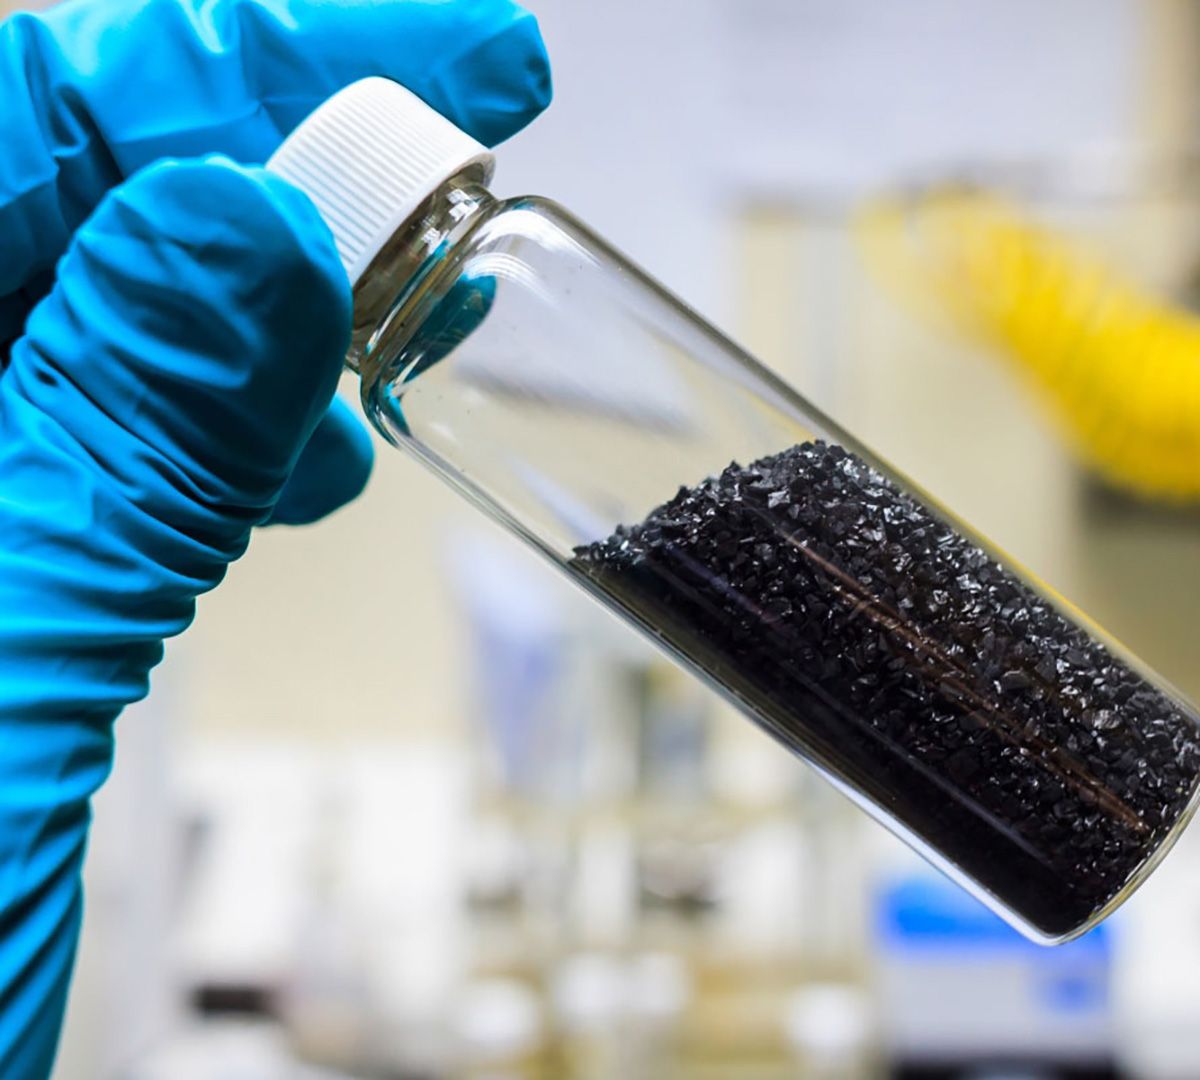 Vietnam Academy of Science and Technology, supported by science commercialization training, is using biochar and biofilm forming microorganism as an environmentally friendly solution to treat oil polluted water and soil.